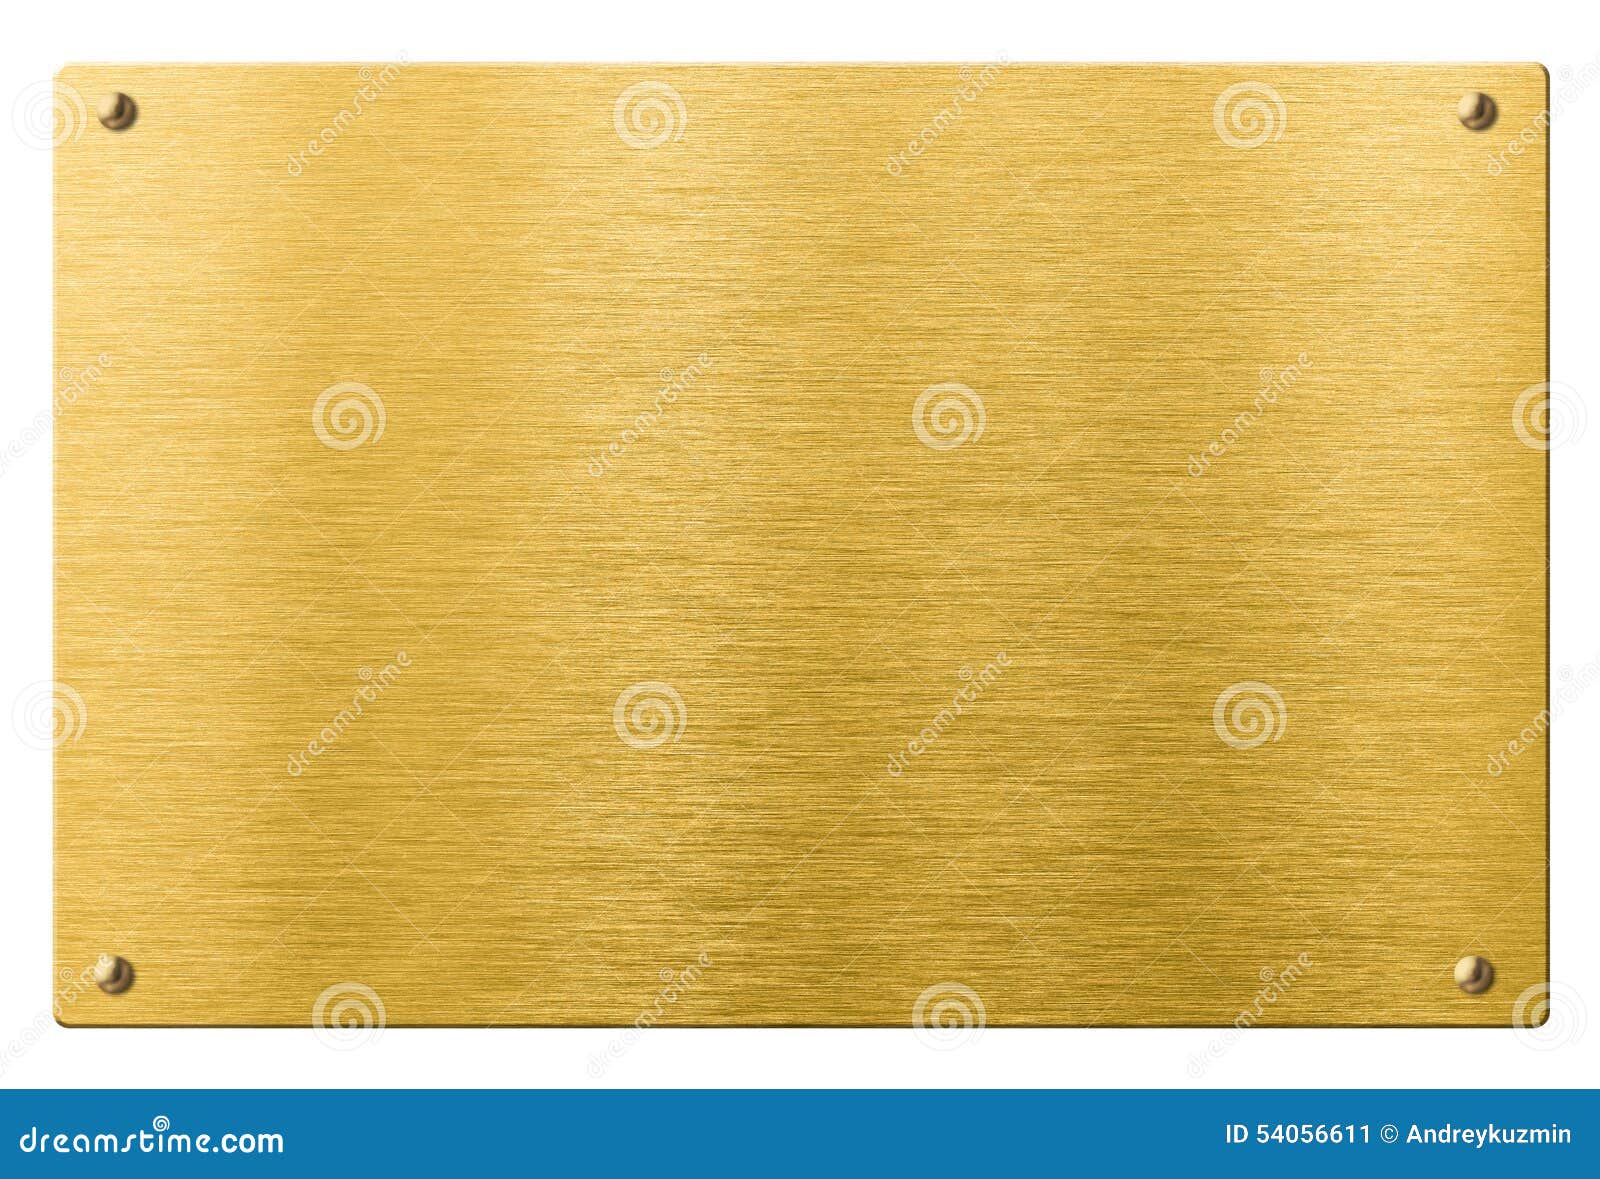 Gold Or Brass Metal Plate With Rivets Isolated Stock Image Image Of